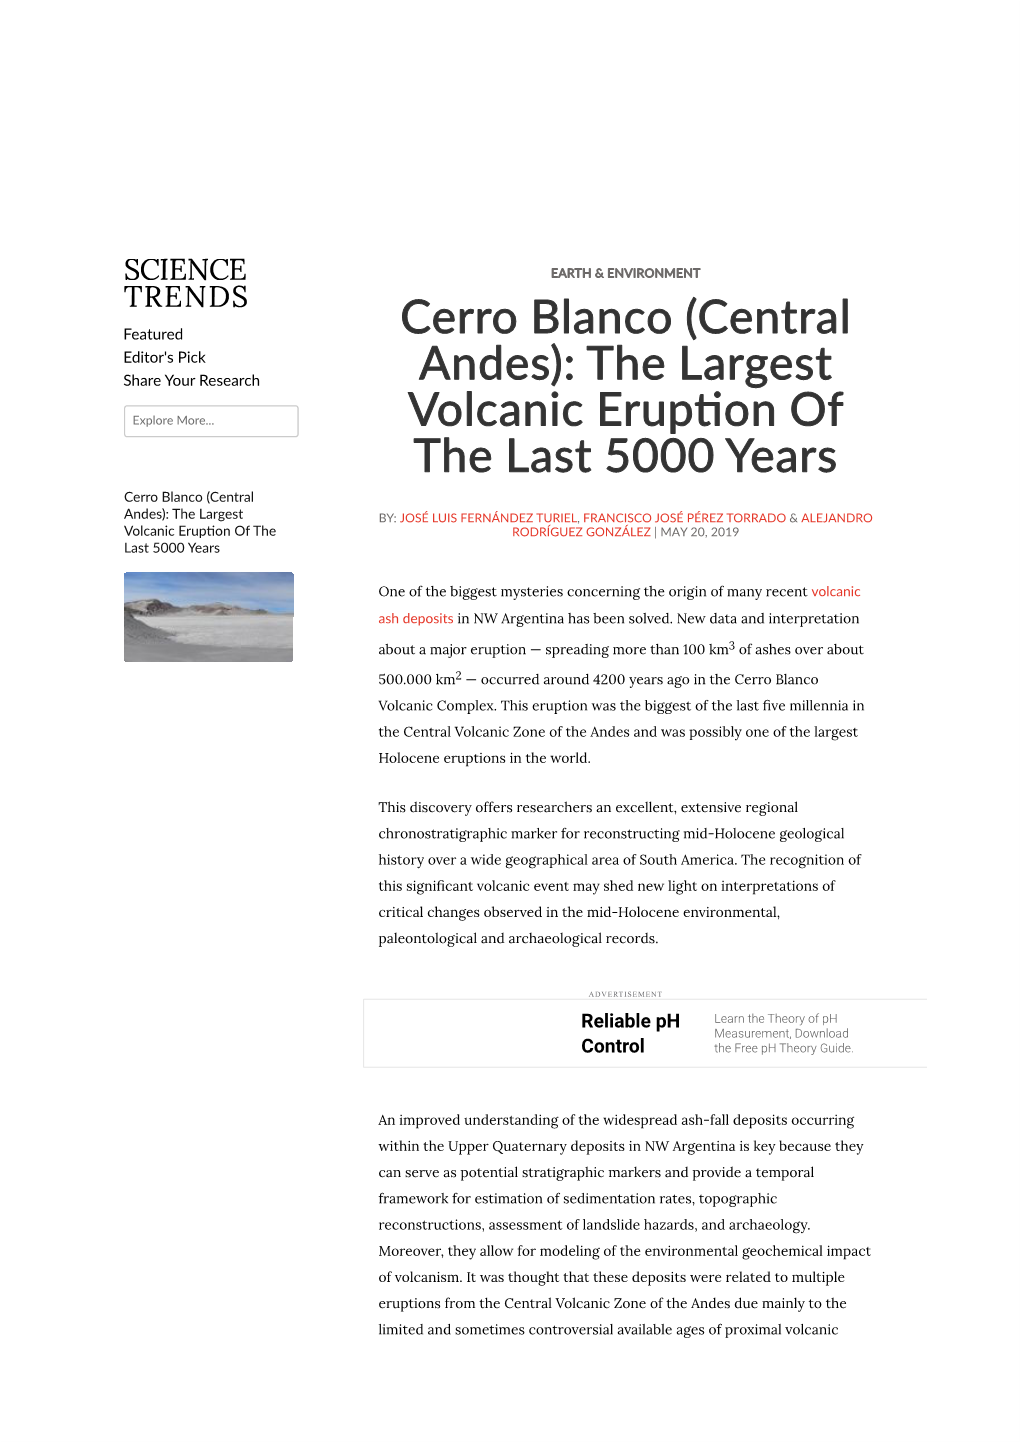 Cerro Blanco (Central Andes): the Largest Volcanic Eruption Of